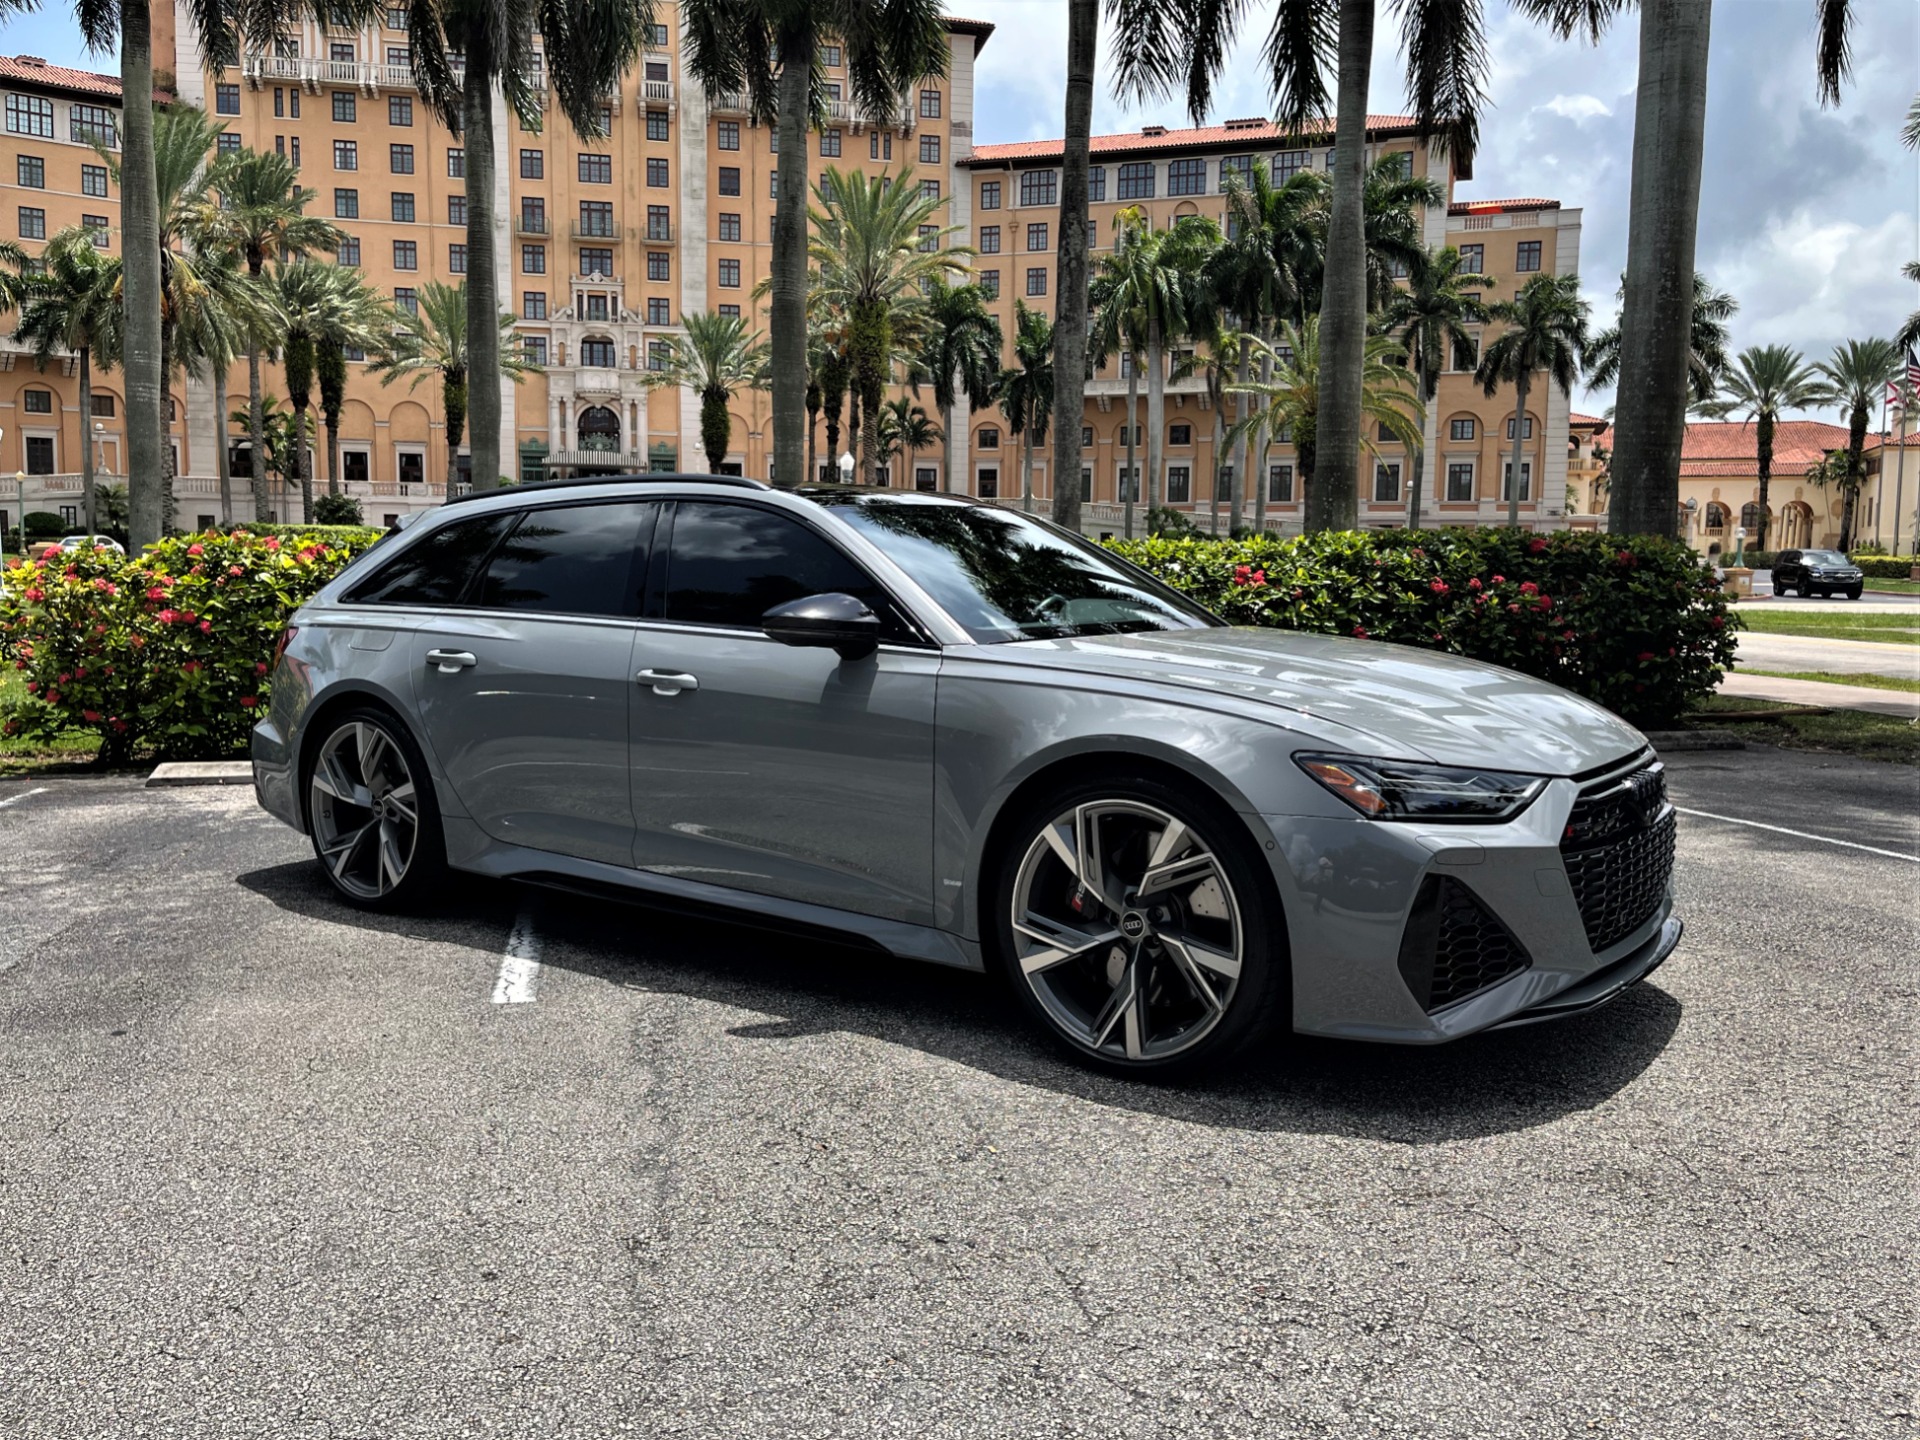 Used 2021 Audi RS 6 Avant 4.0T quattro Avant for sale Sold at The Gables Sports Cars in Miami FL 33146 3